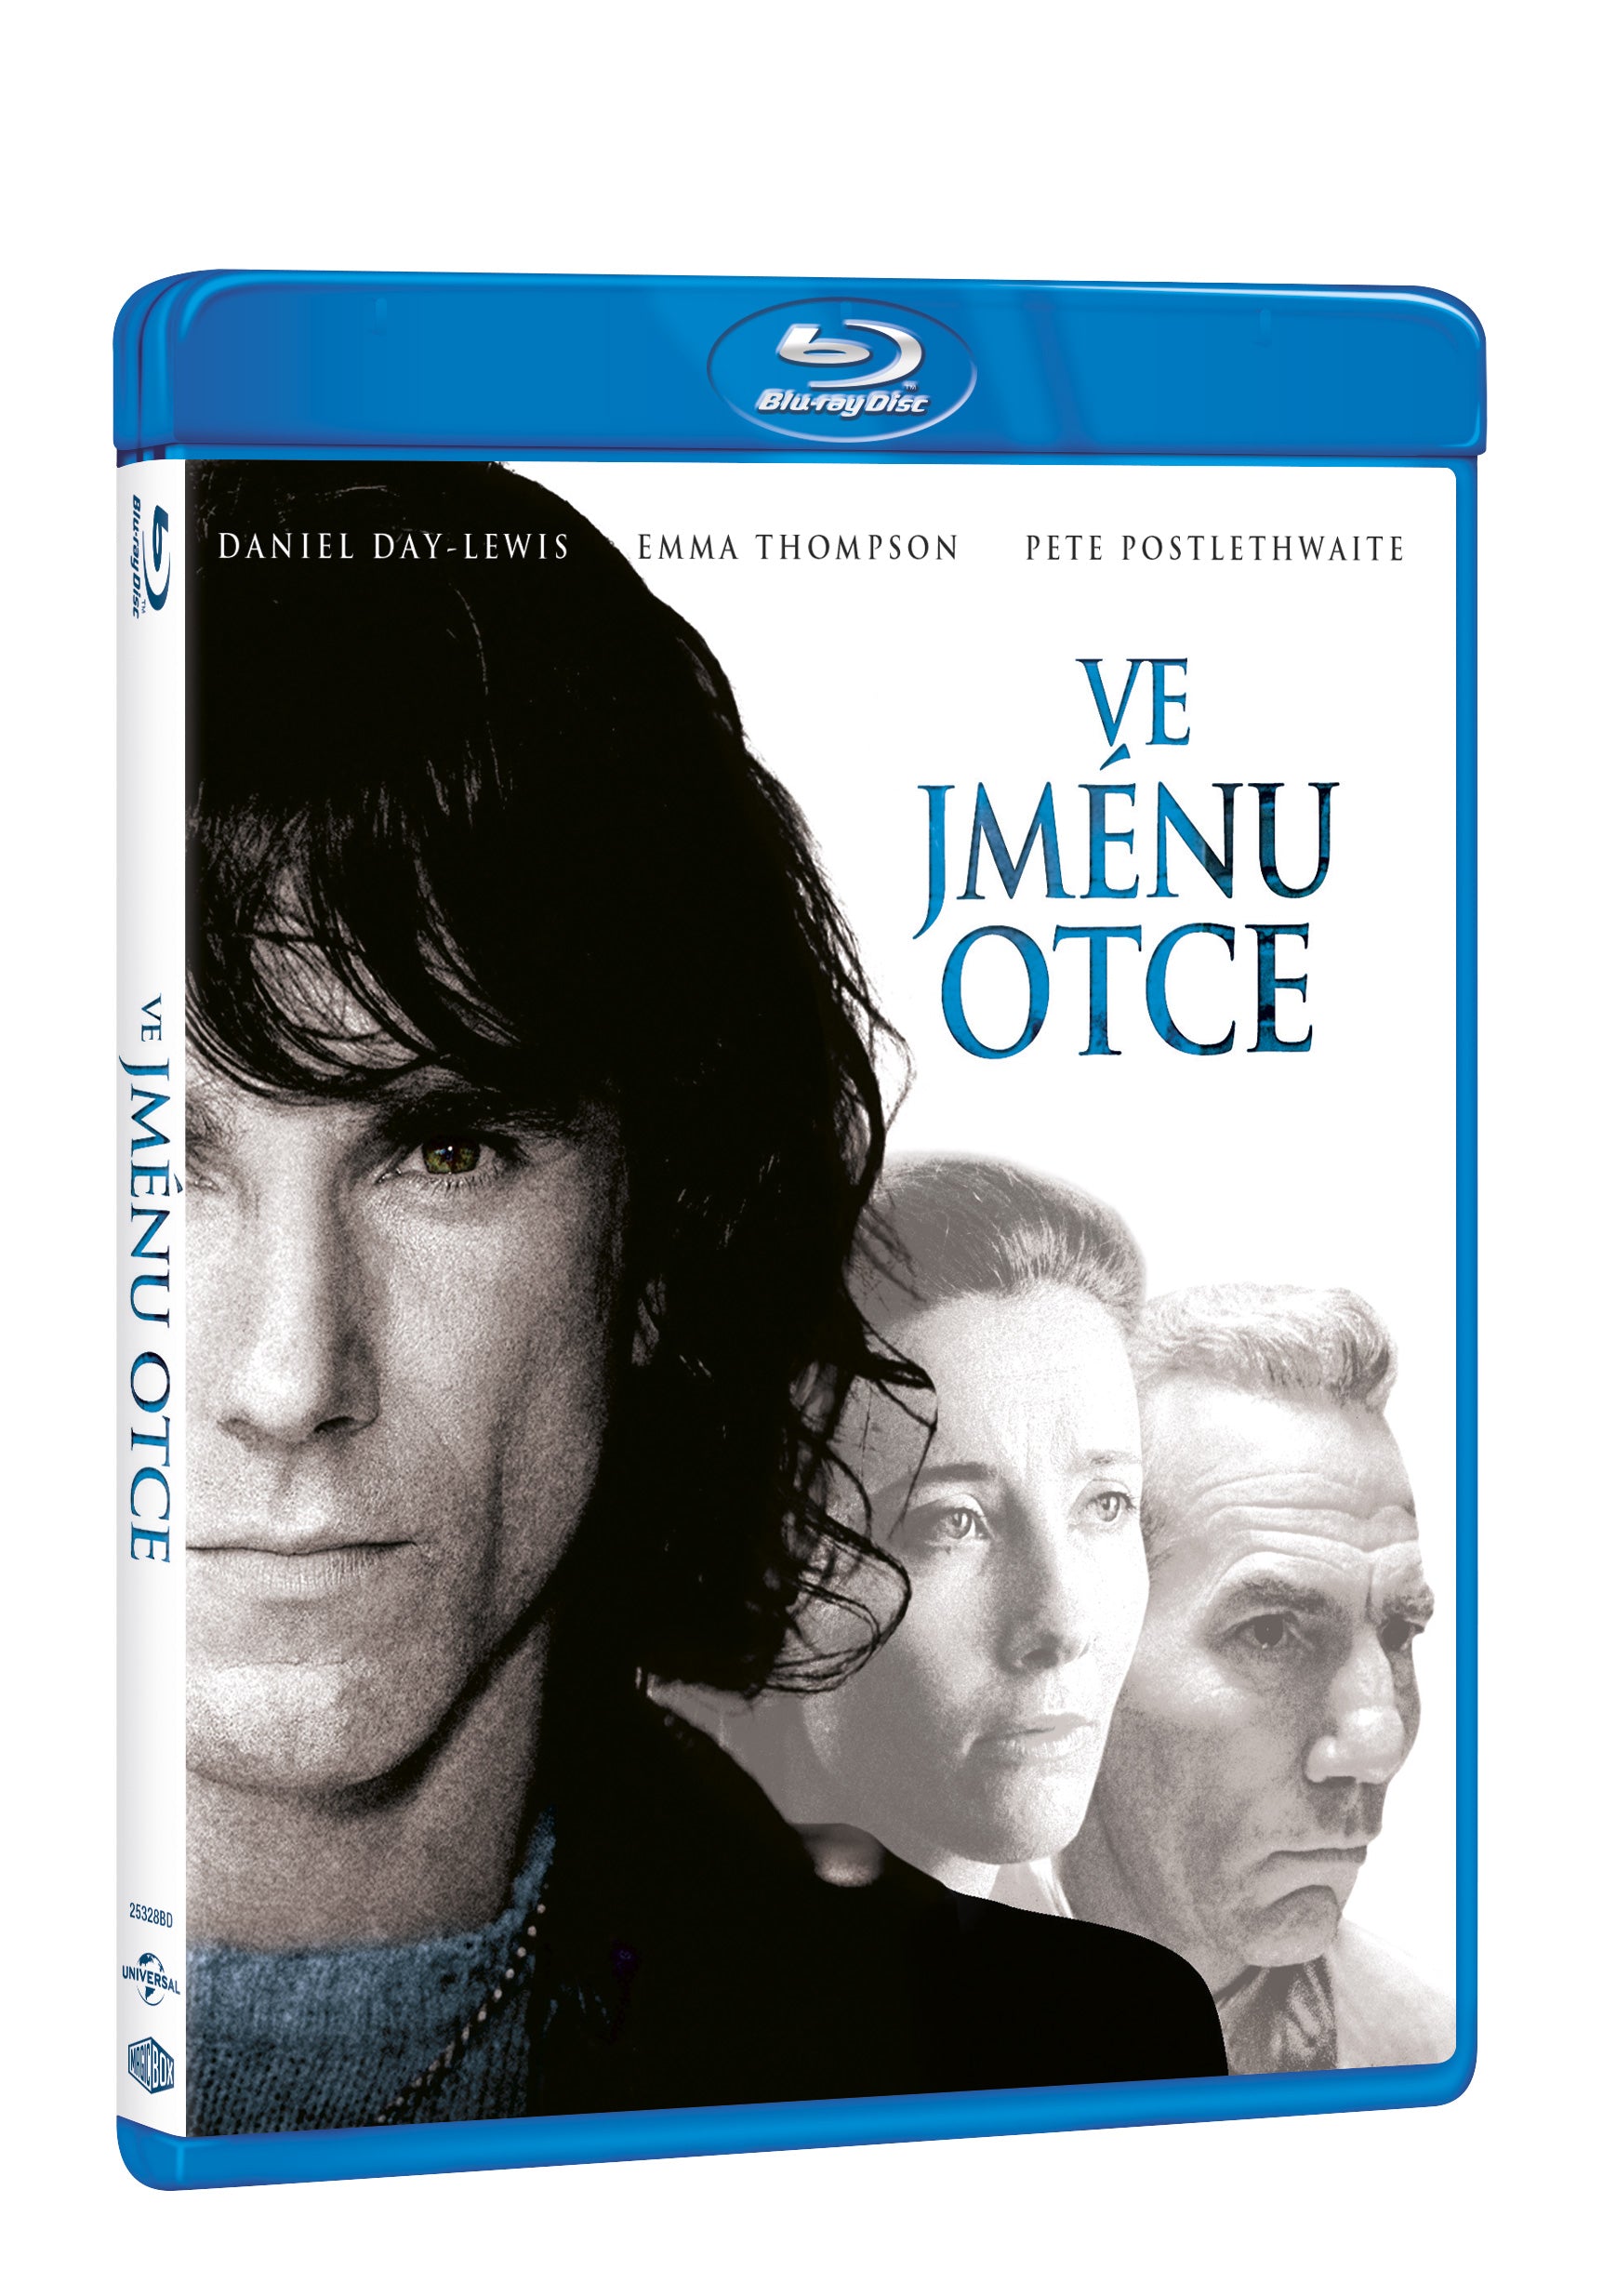 Ve jmenu otce BD / In the Name of the Father - Czech version